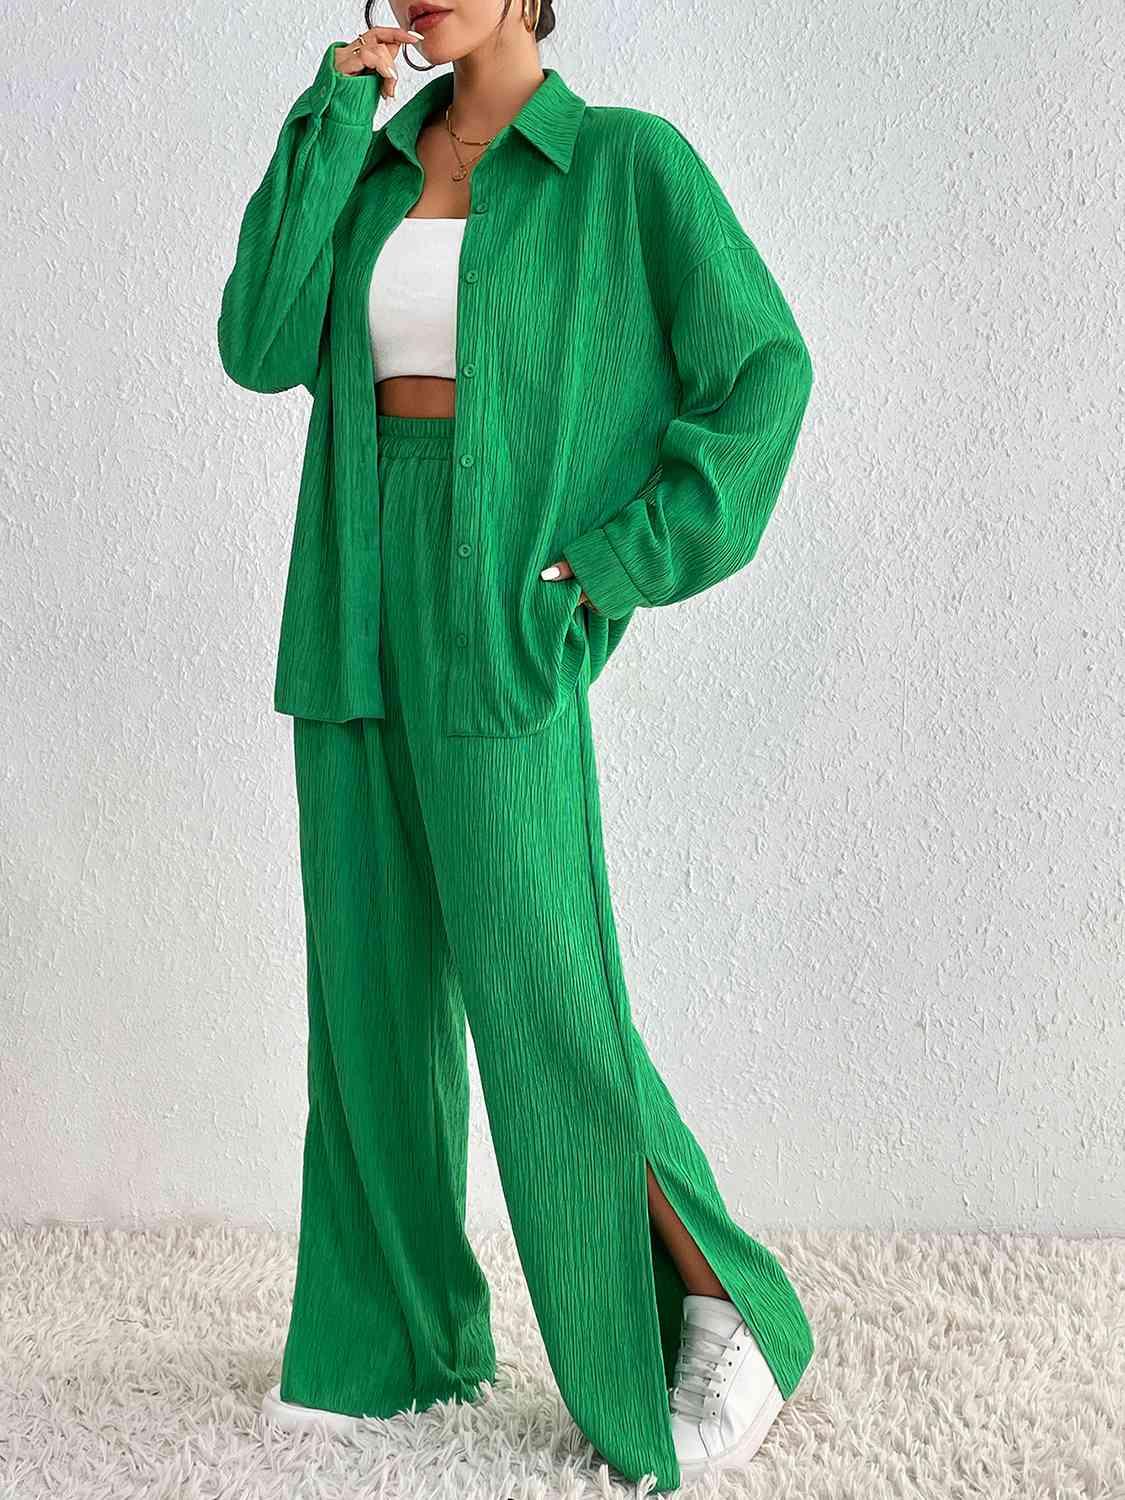 a woman in a green jacket and pants